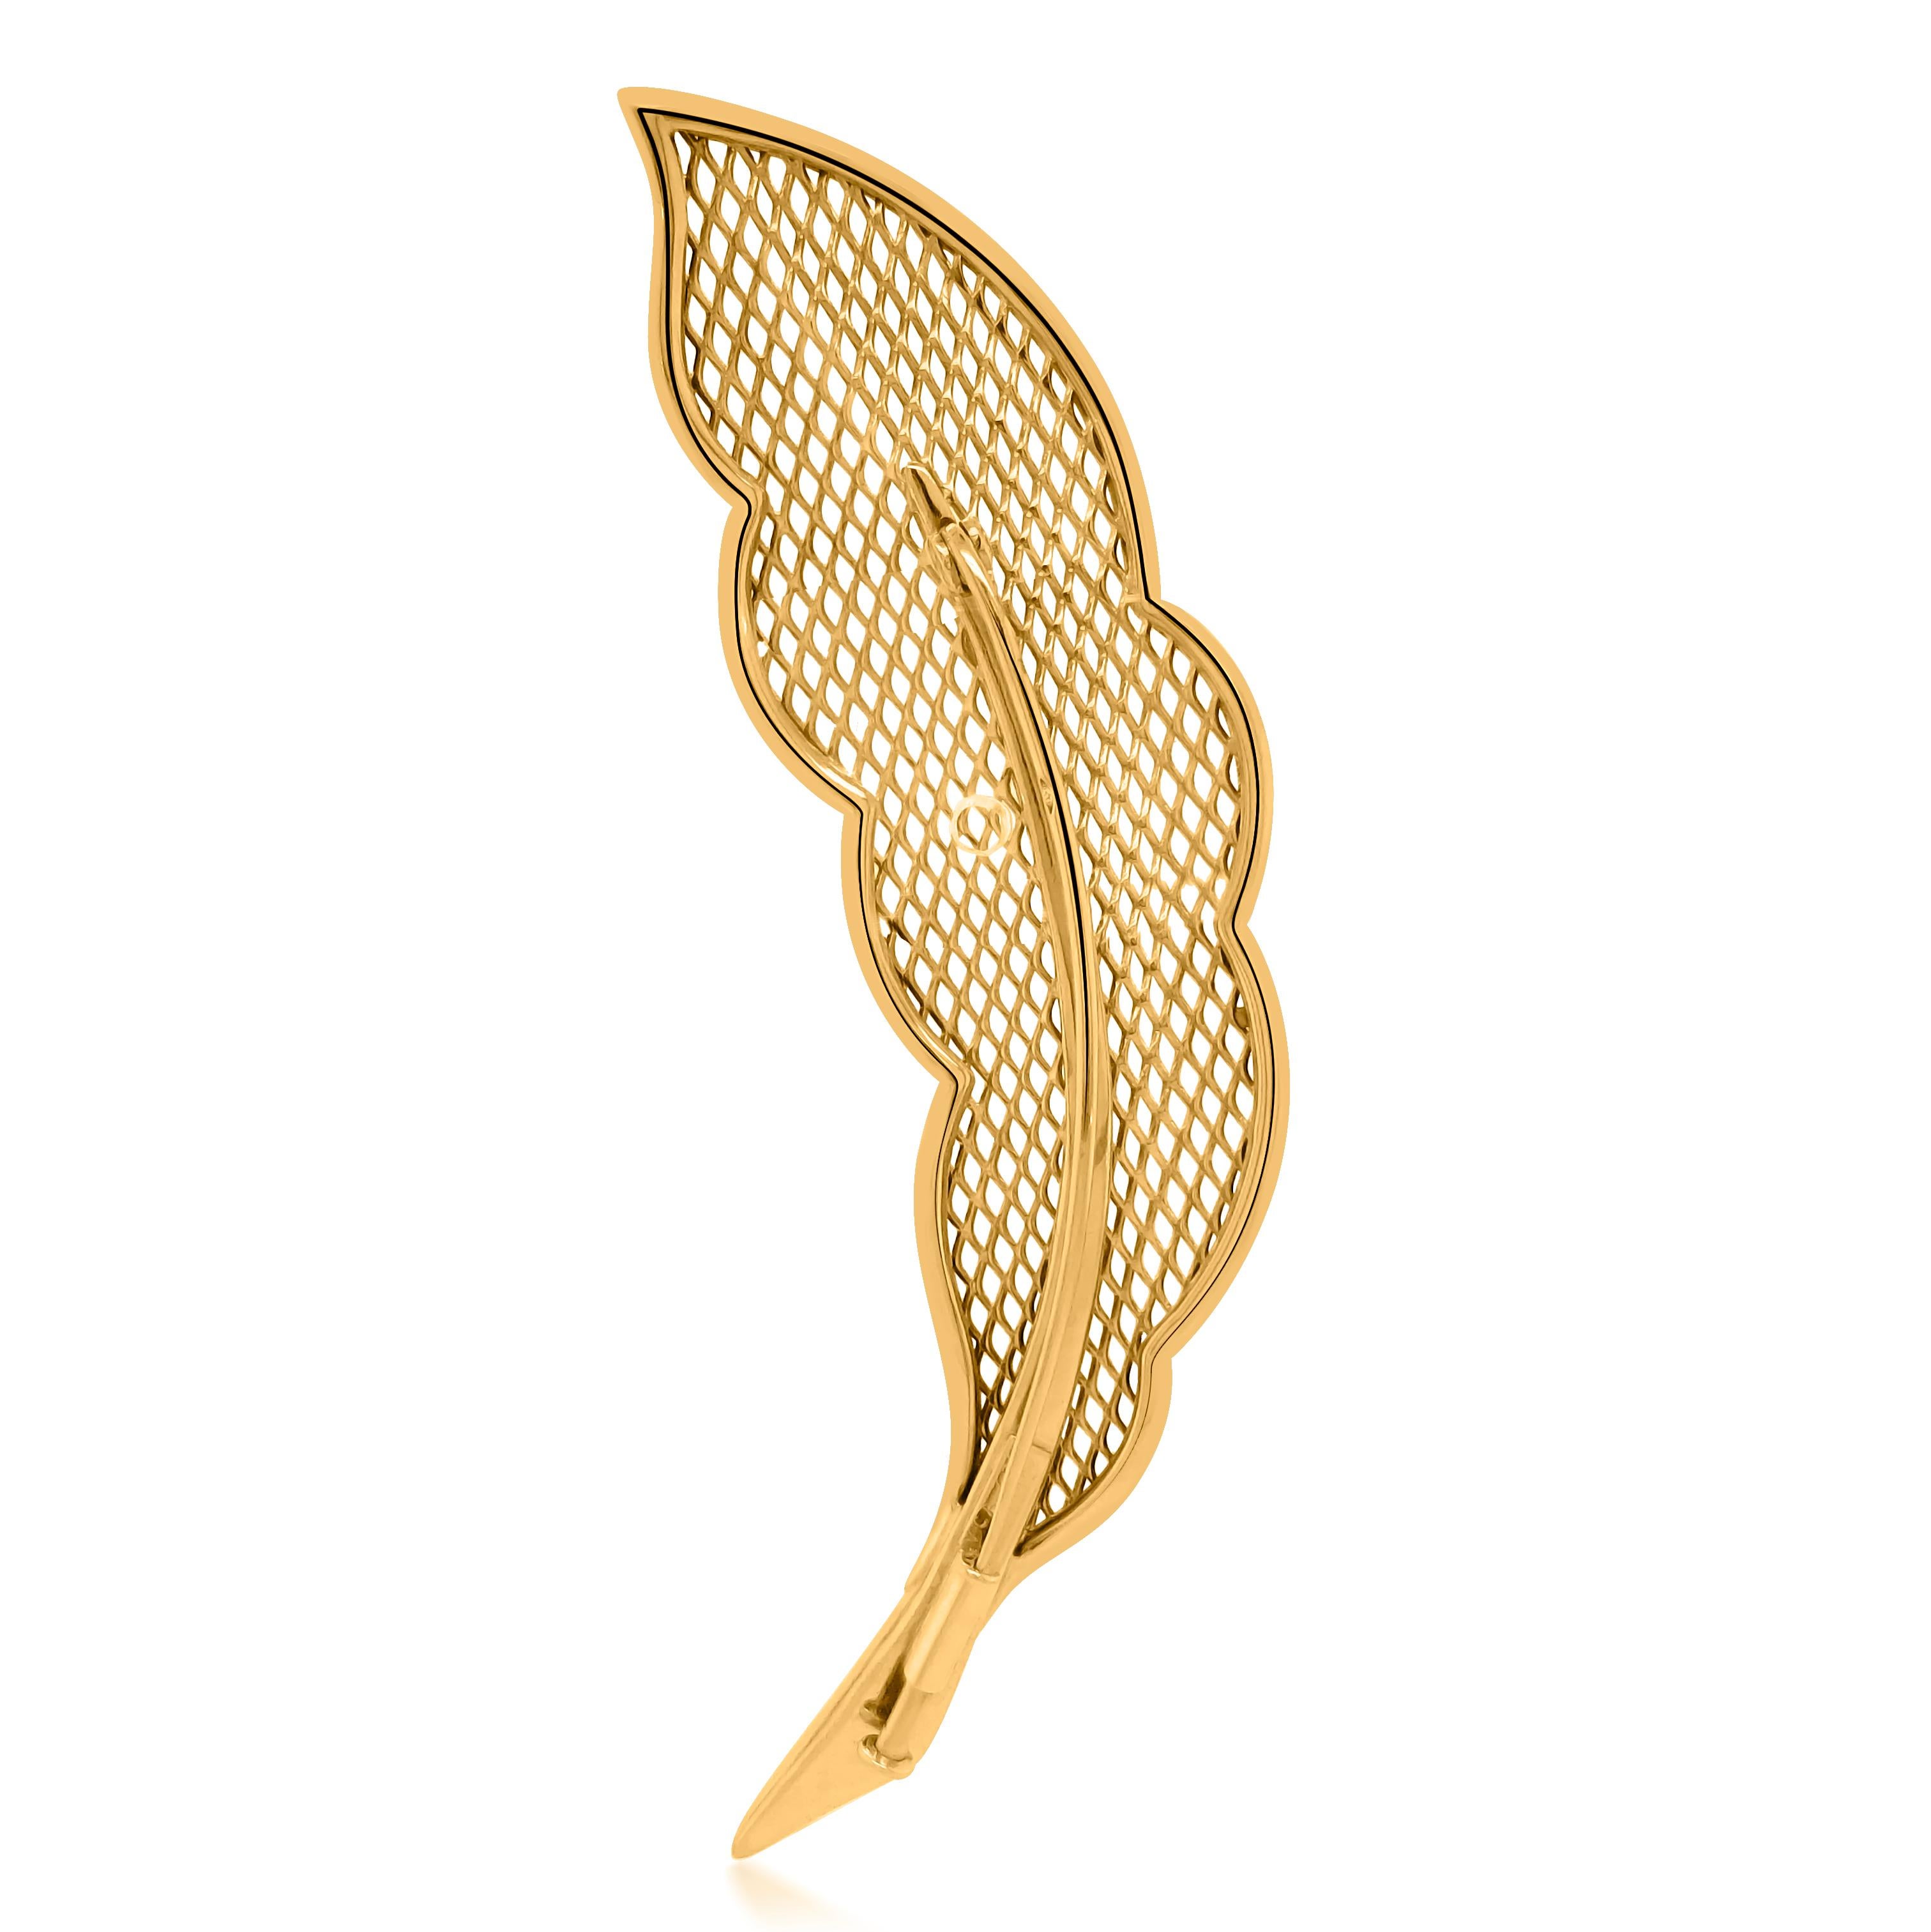 This authentic Retro Van Cleef & Arpels gold leaf brooch is crafted in solid 18-karat yellow gold, designed as a leaf with a mesh fill, weighing 16.7 grams and measuring 30.5*89.5 mm. The brooch is signed VCA; stamped 750, French hallmark for 18K